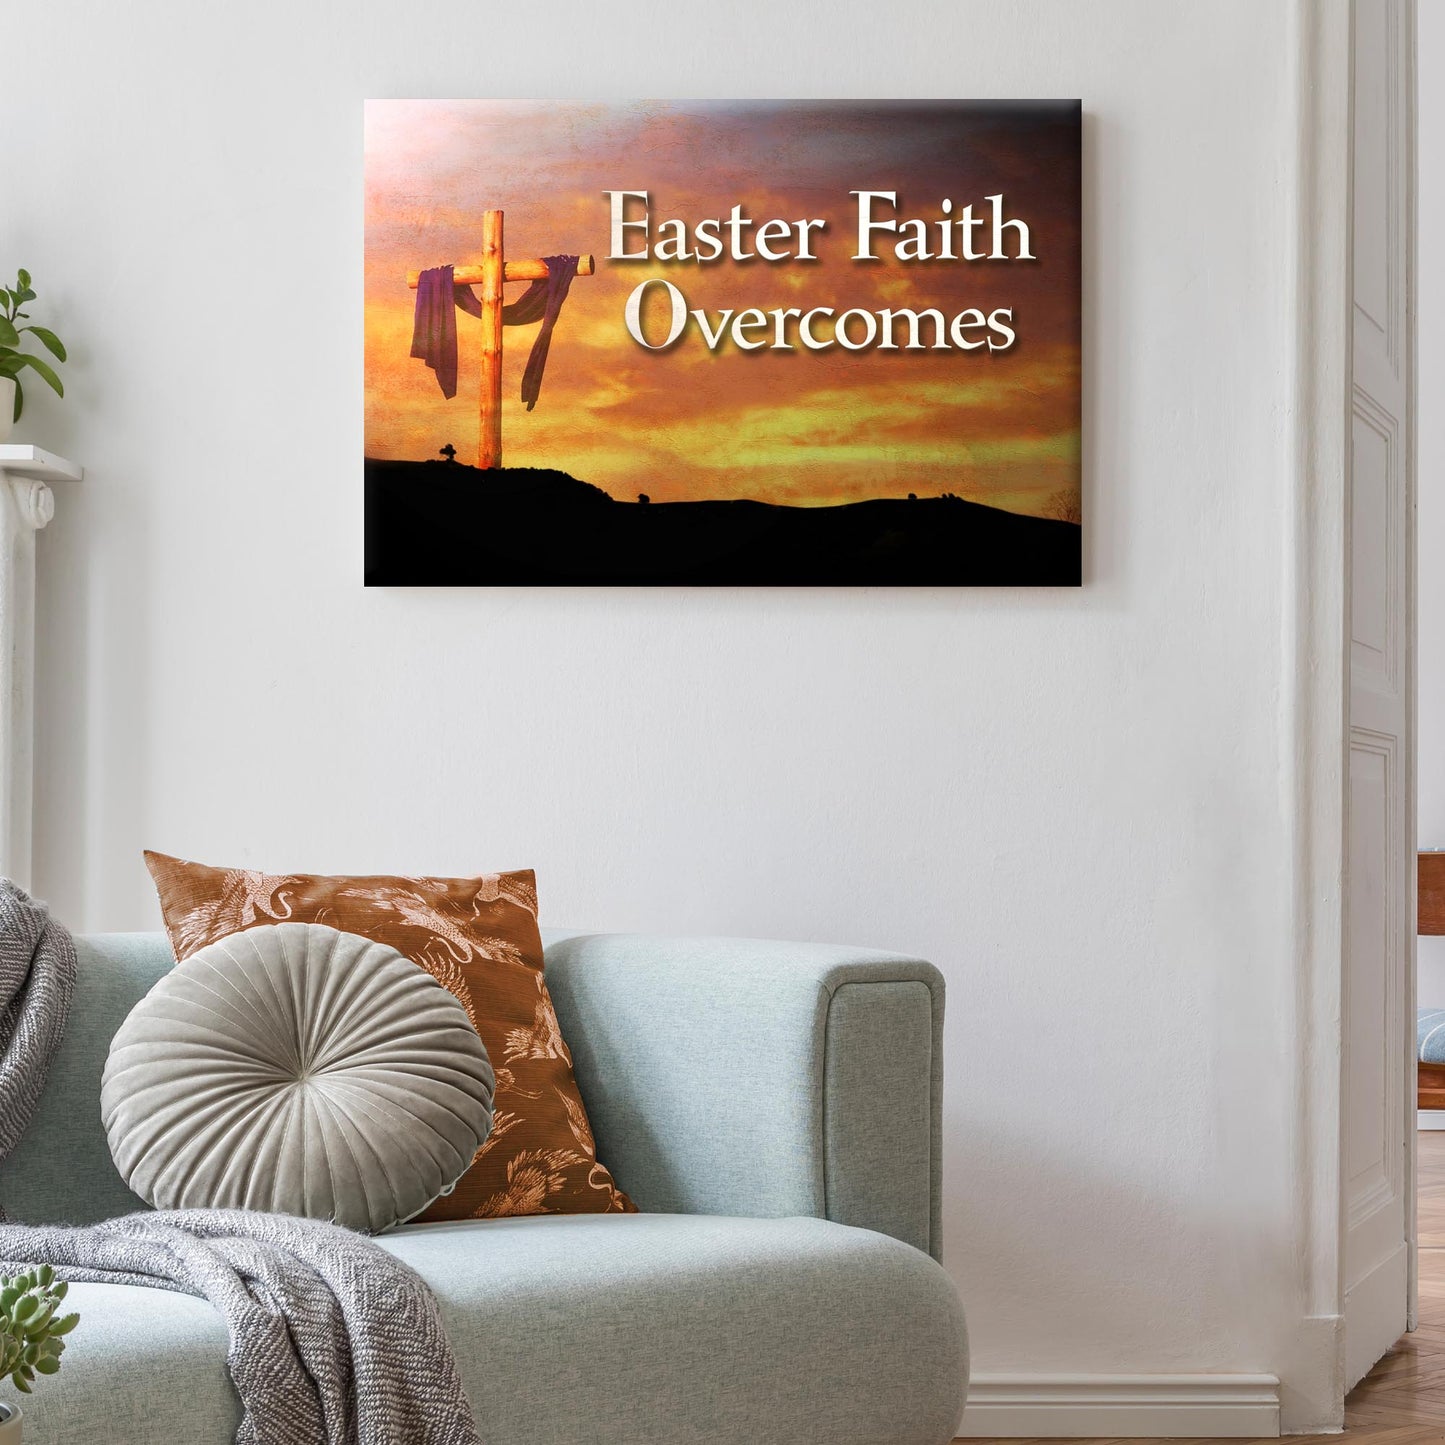 Easter Faith Overcomes Sign- Image by Tailored Canvases